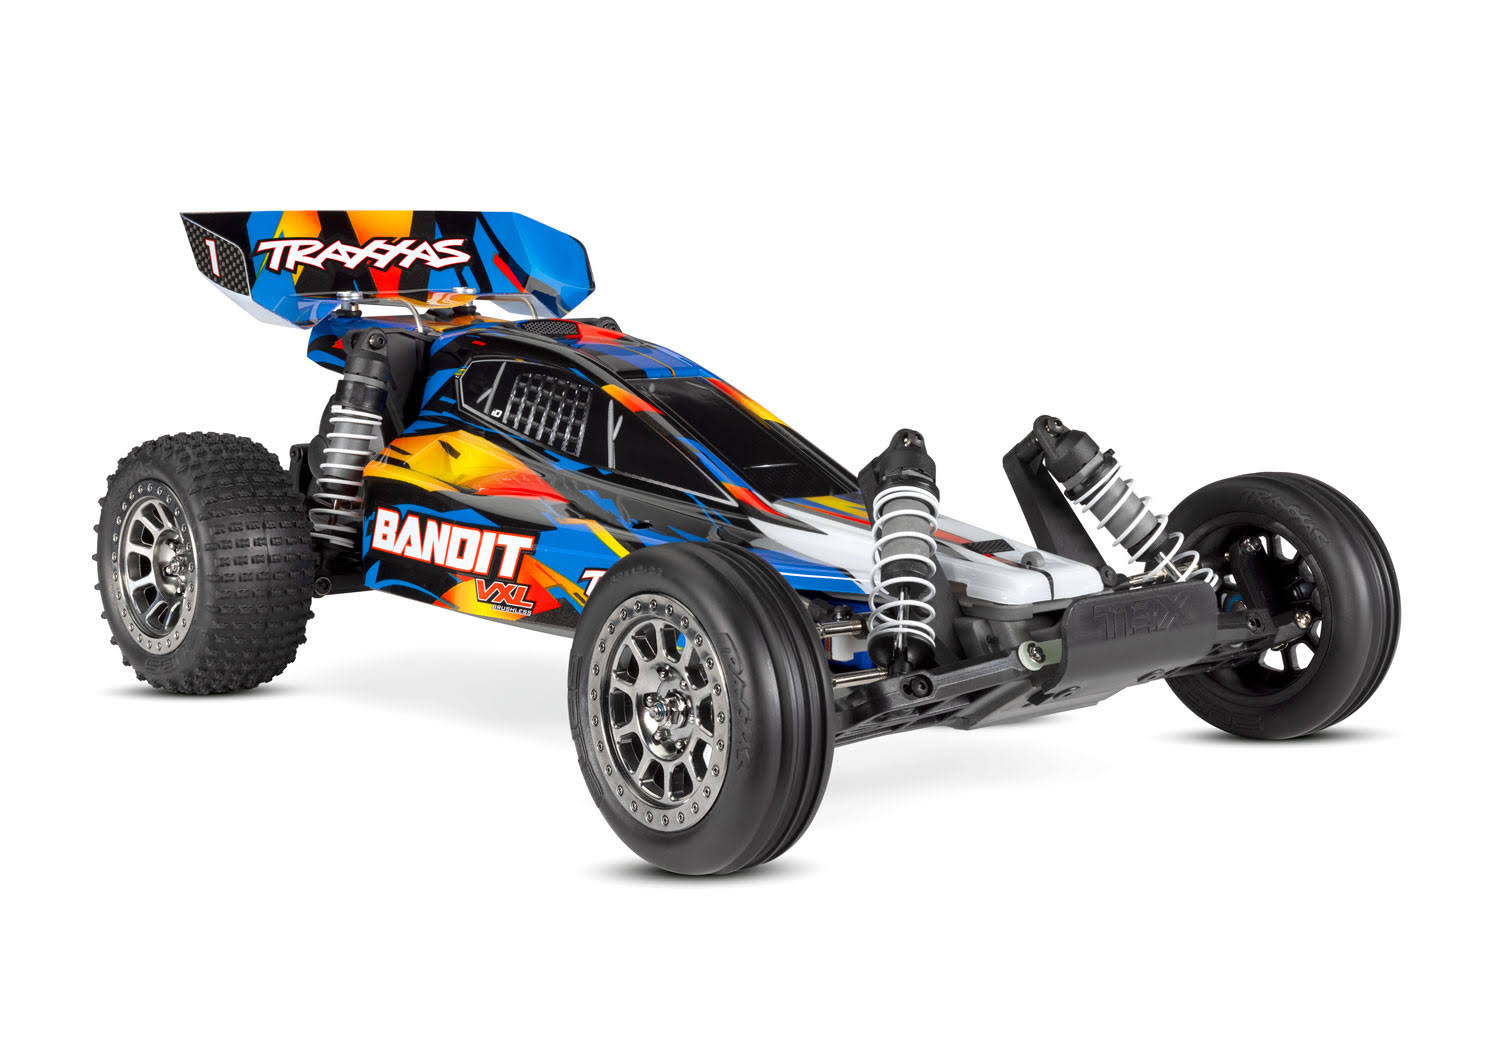 Traxxas Bandit VXL Brushless 1/10 RTR 2WD Buggy w/Magnum 272R Blue